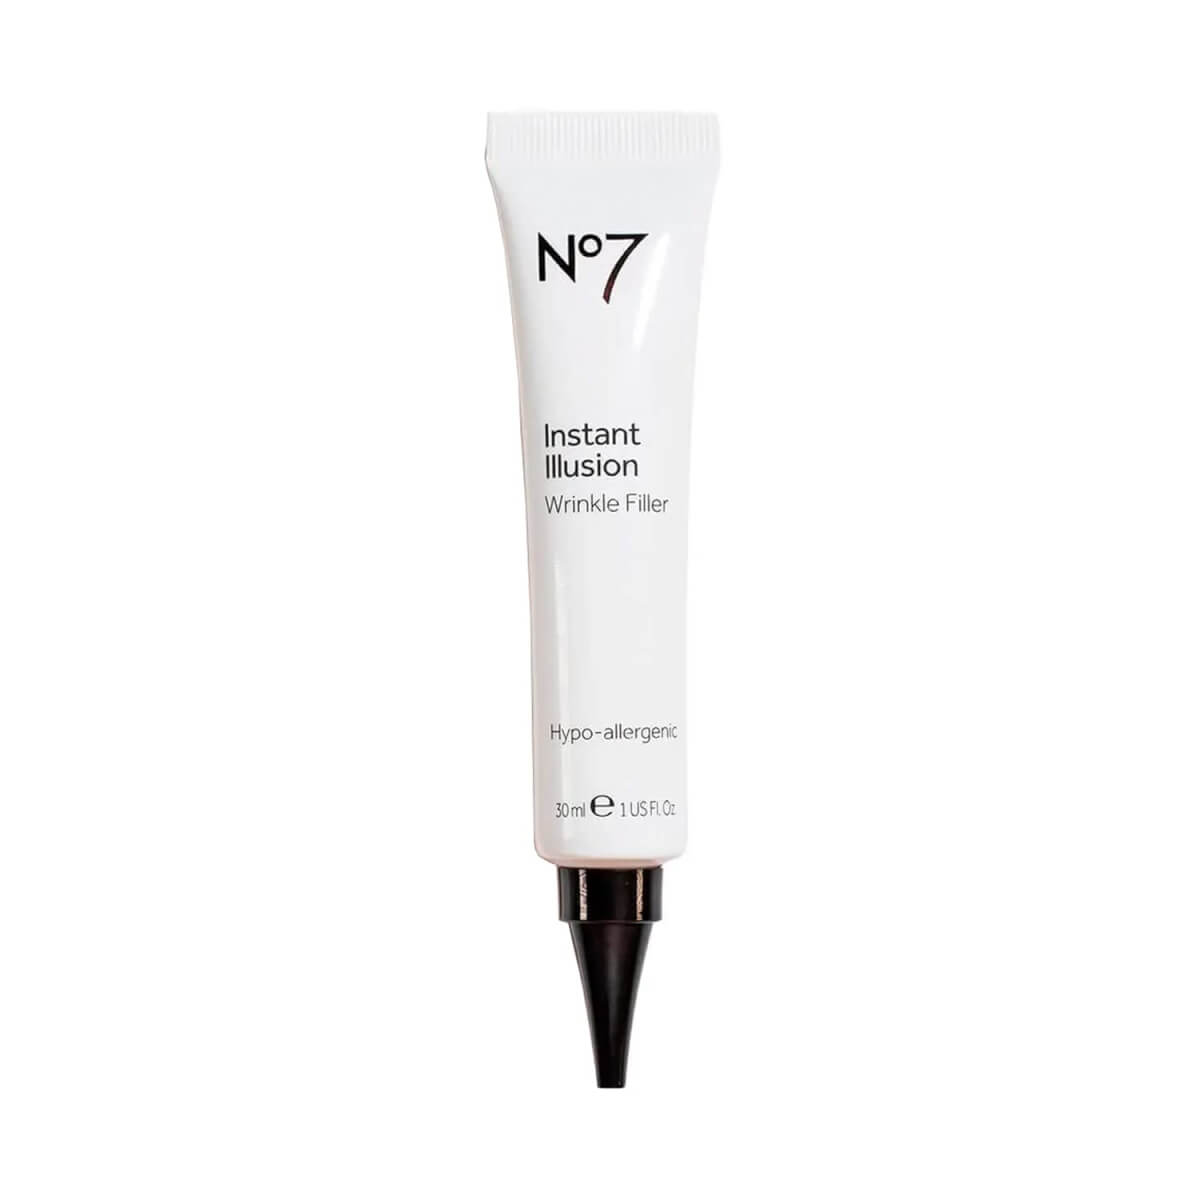 No. 7 Instant Illusions Wrinkle Filler